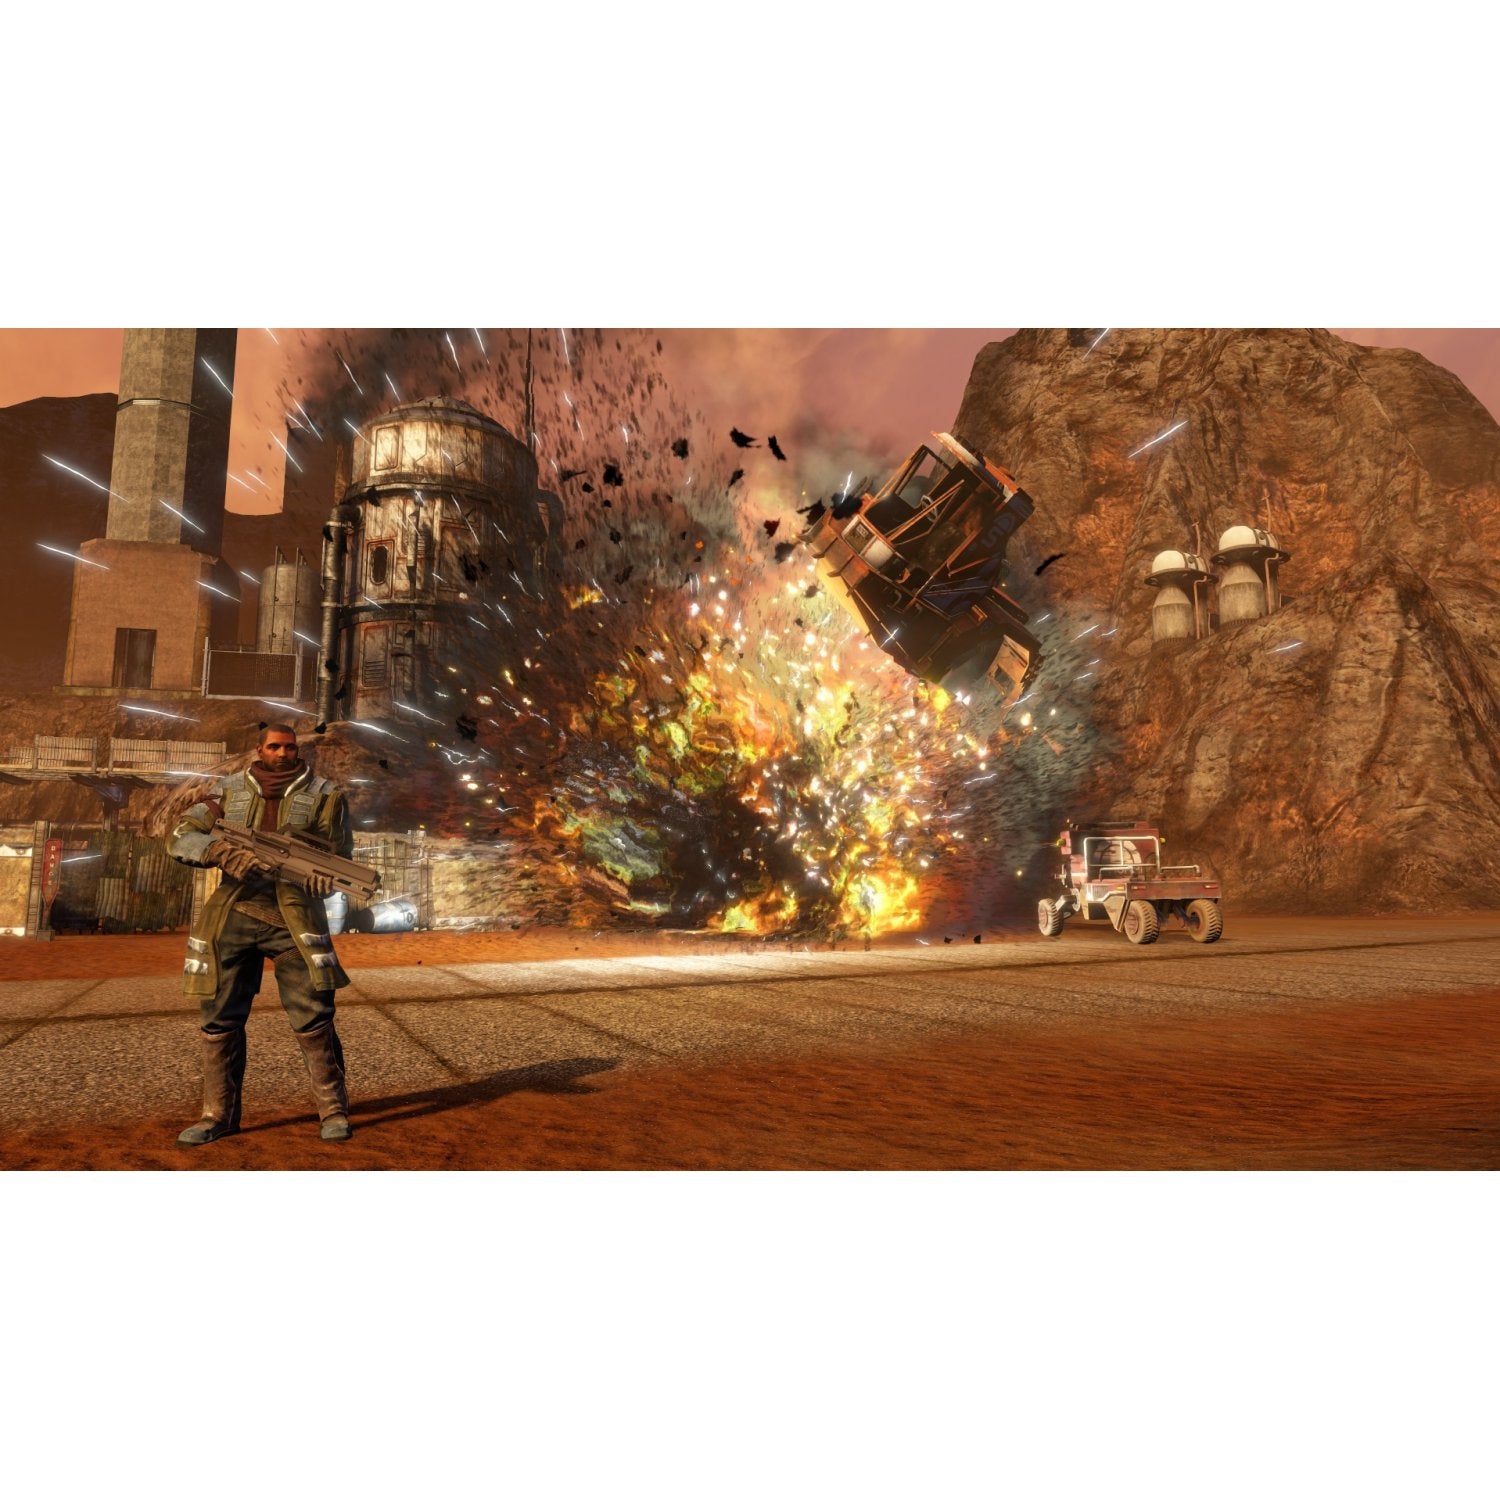 PS4 Red Faction: Guerrilla Re-Mars-tered (NC16)